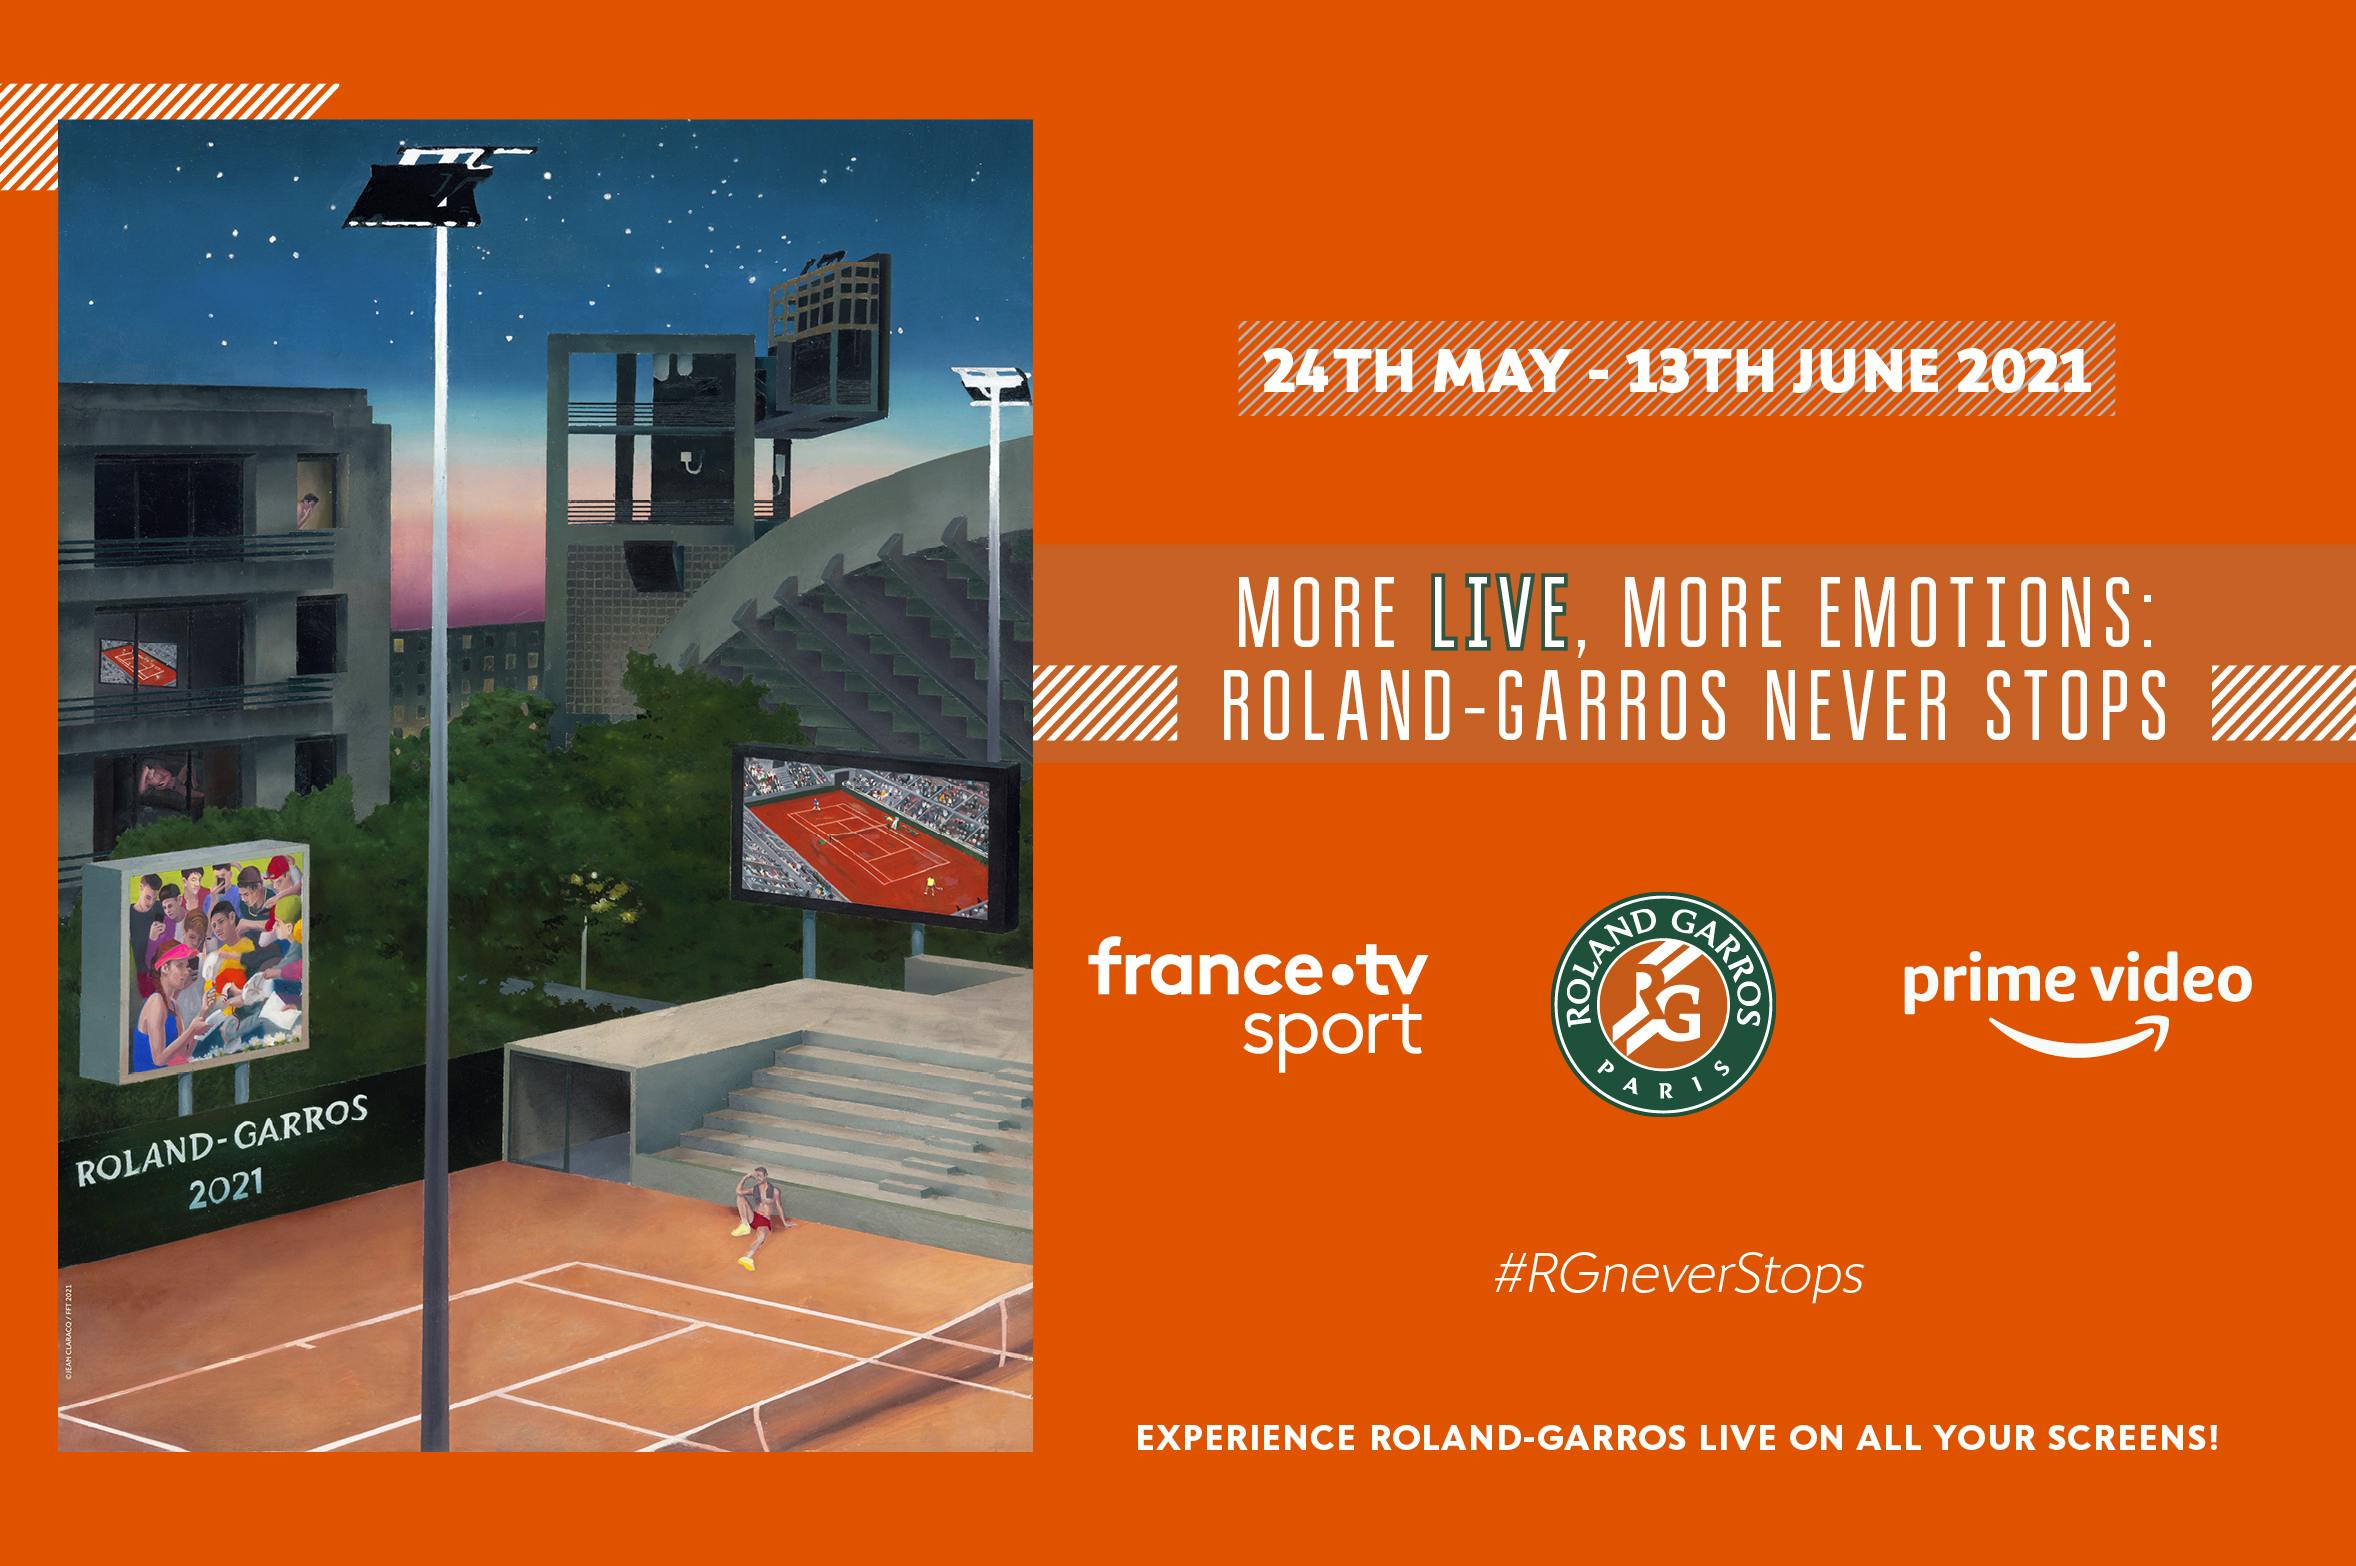 ROLAND-GARROS 2021 BROADCAST: WHERE AND HOW TO WATCH THE TOURNAMENT